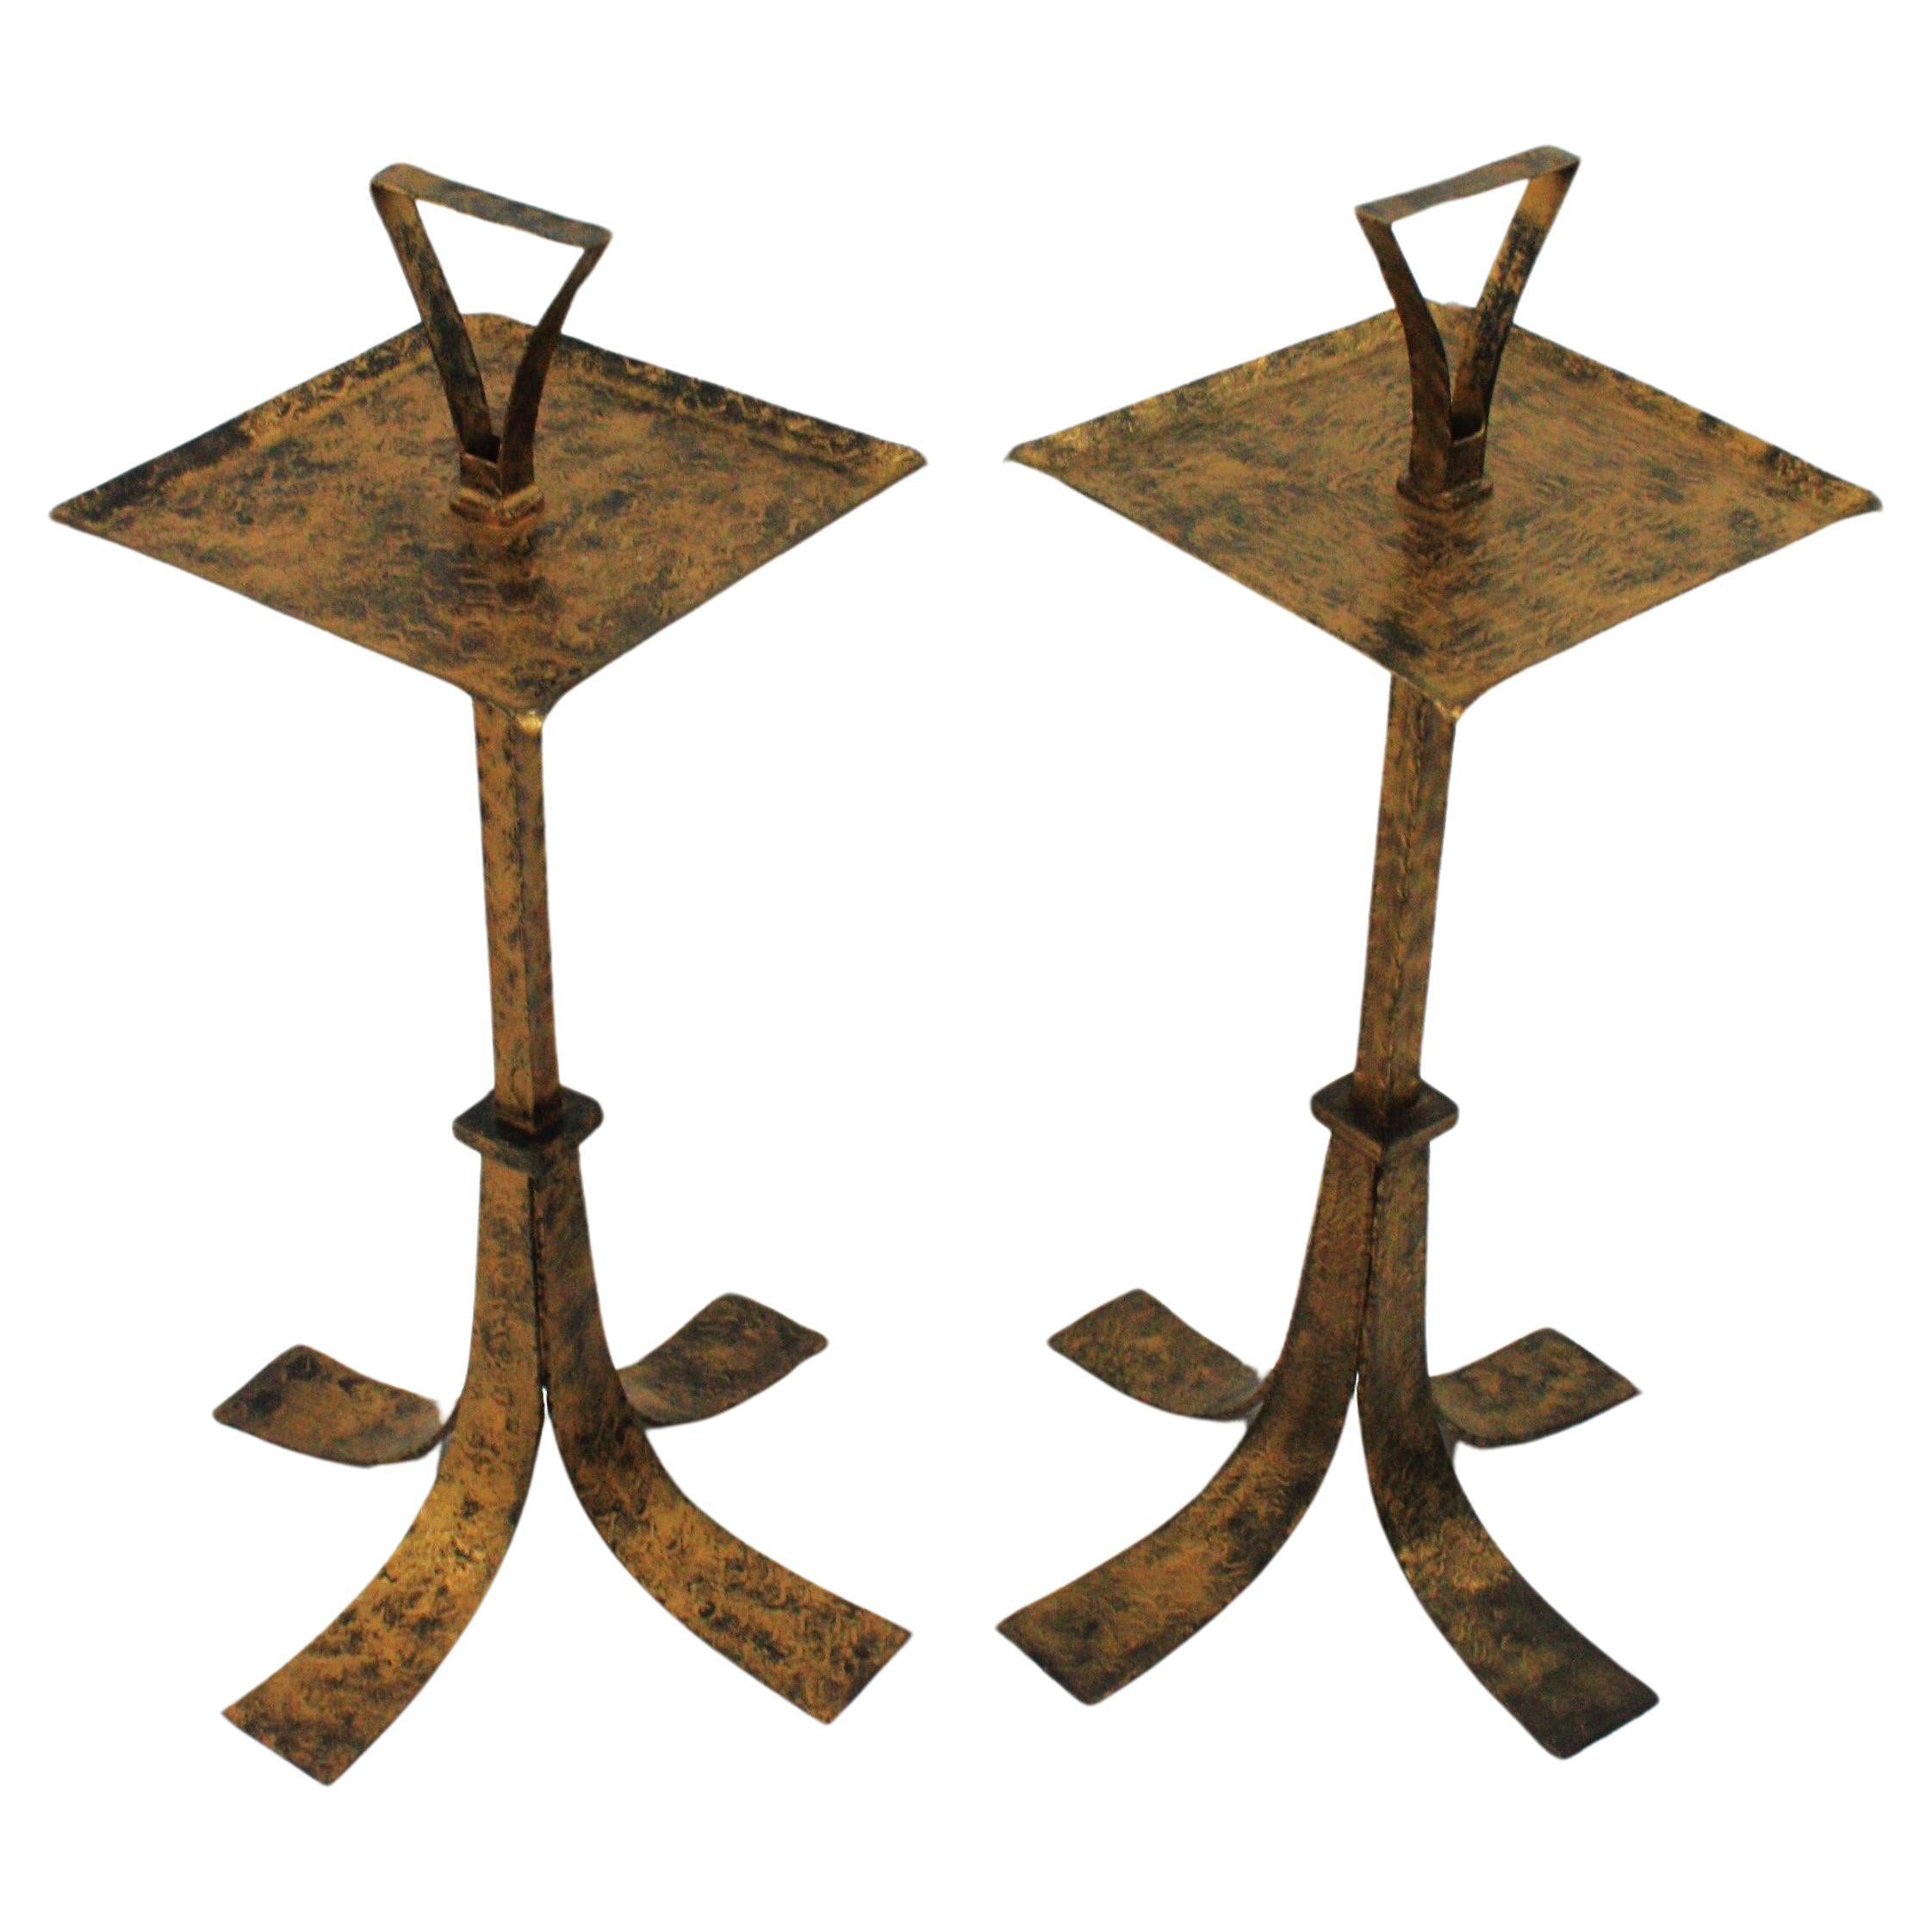 Pair Spanish Brutalist Drink Tables, wrought iron
Gilt patinated brutalist Martini tables with squared top and handle, Spain, 1950s
Wrought iron tables standing on four footed bases. Entirely made by hand with Brutalist design and strong